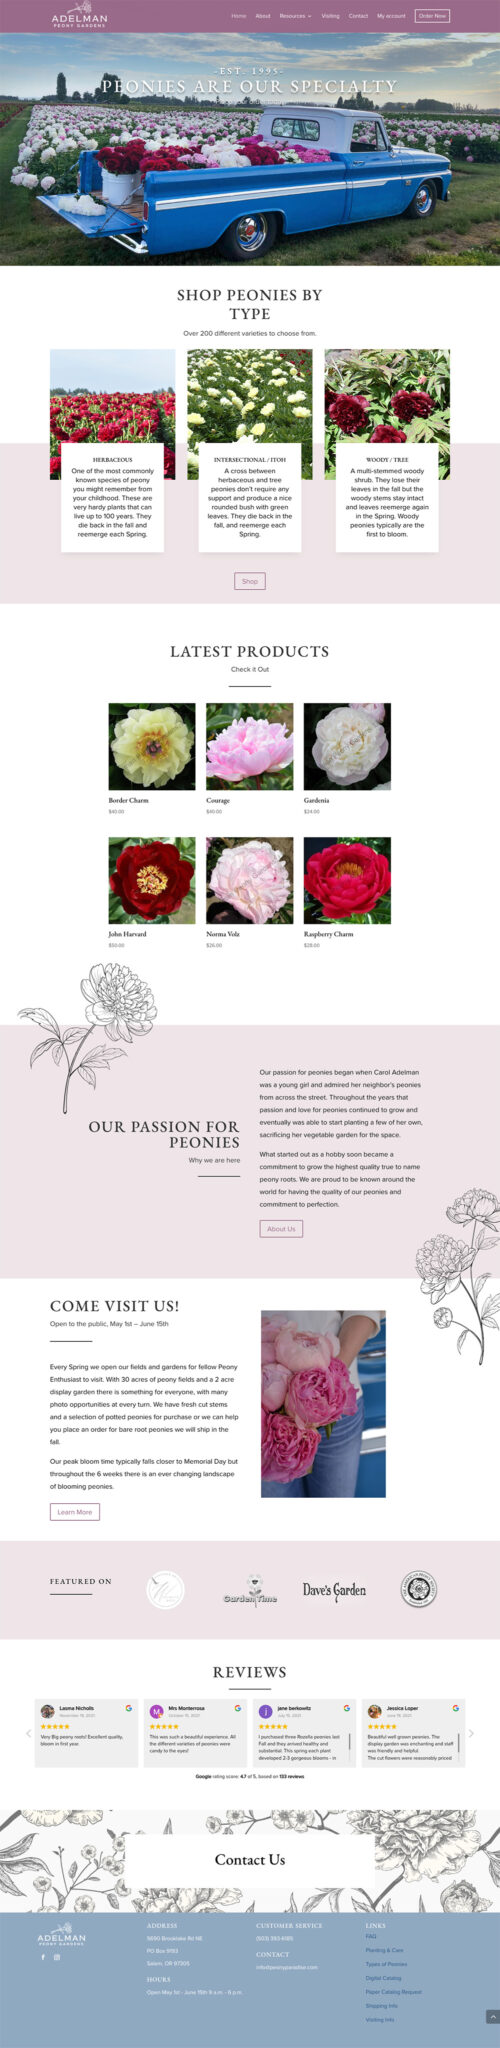 Adelman Peony Gardens Homepage | After